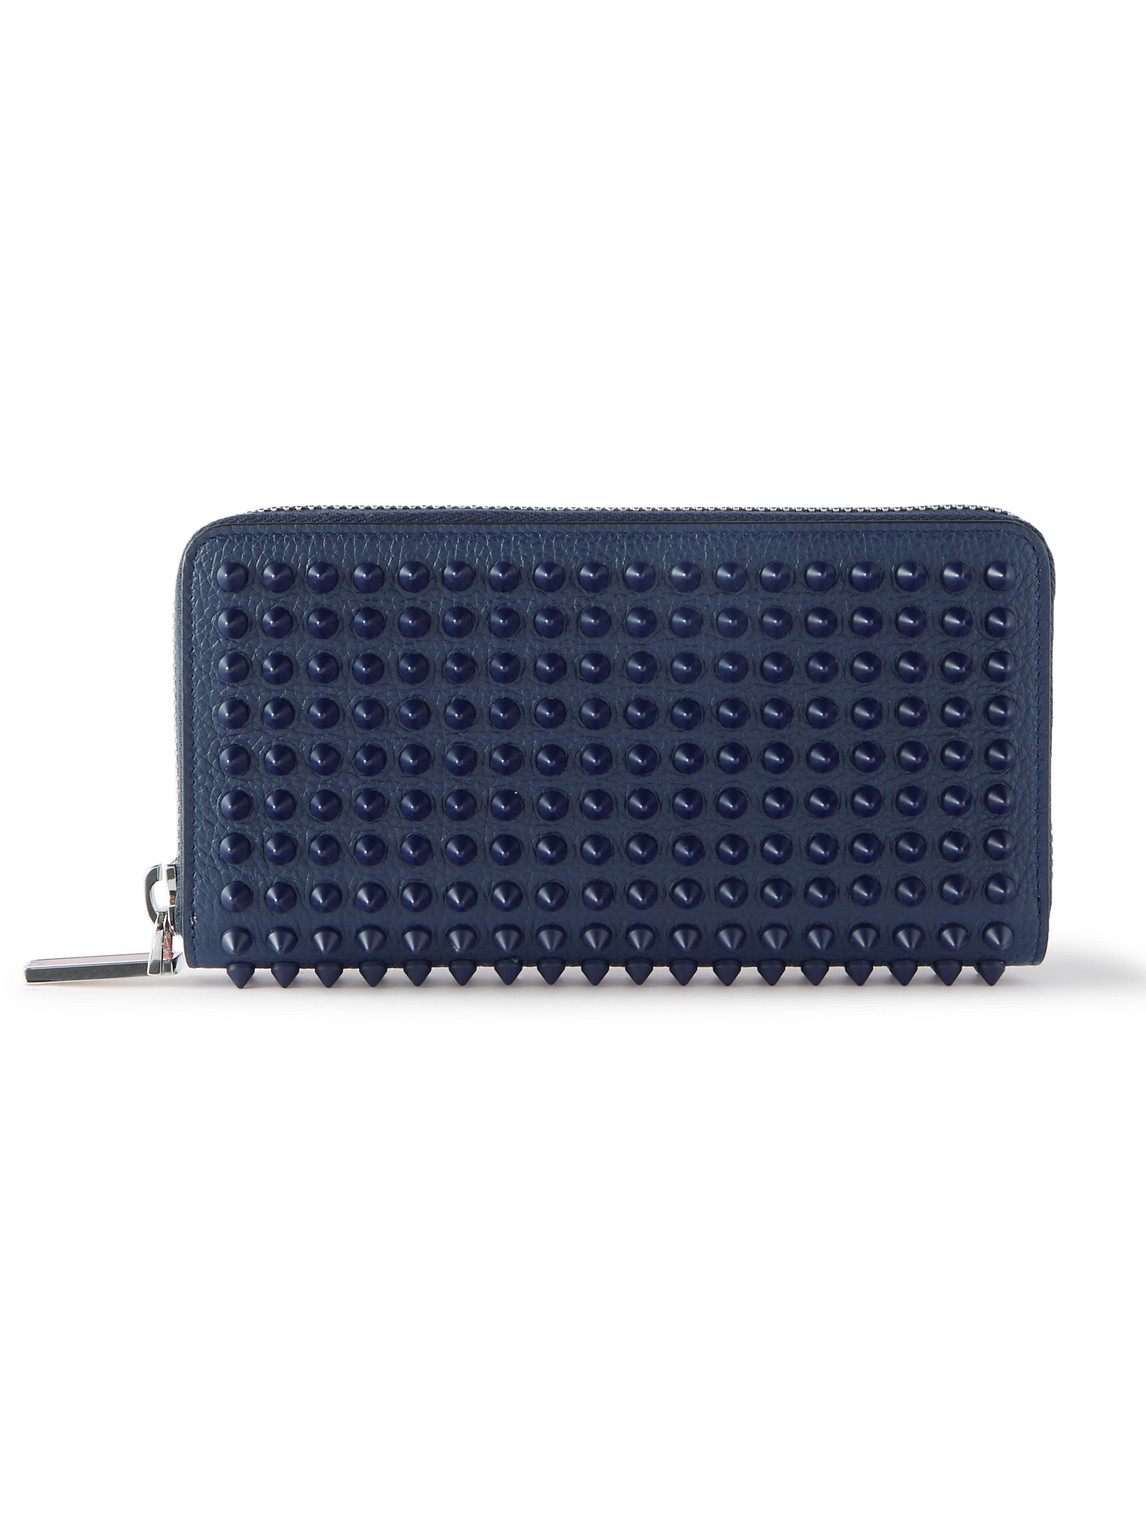 Christian Louboutin Spiked Full-grain Leather Zip-around Wallet In Blue